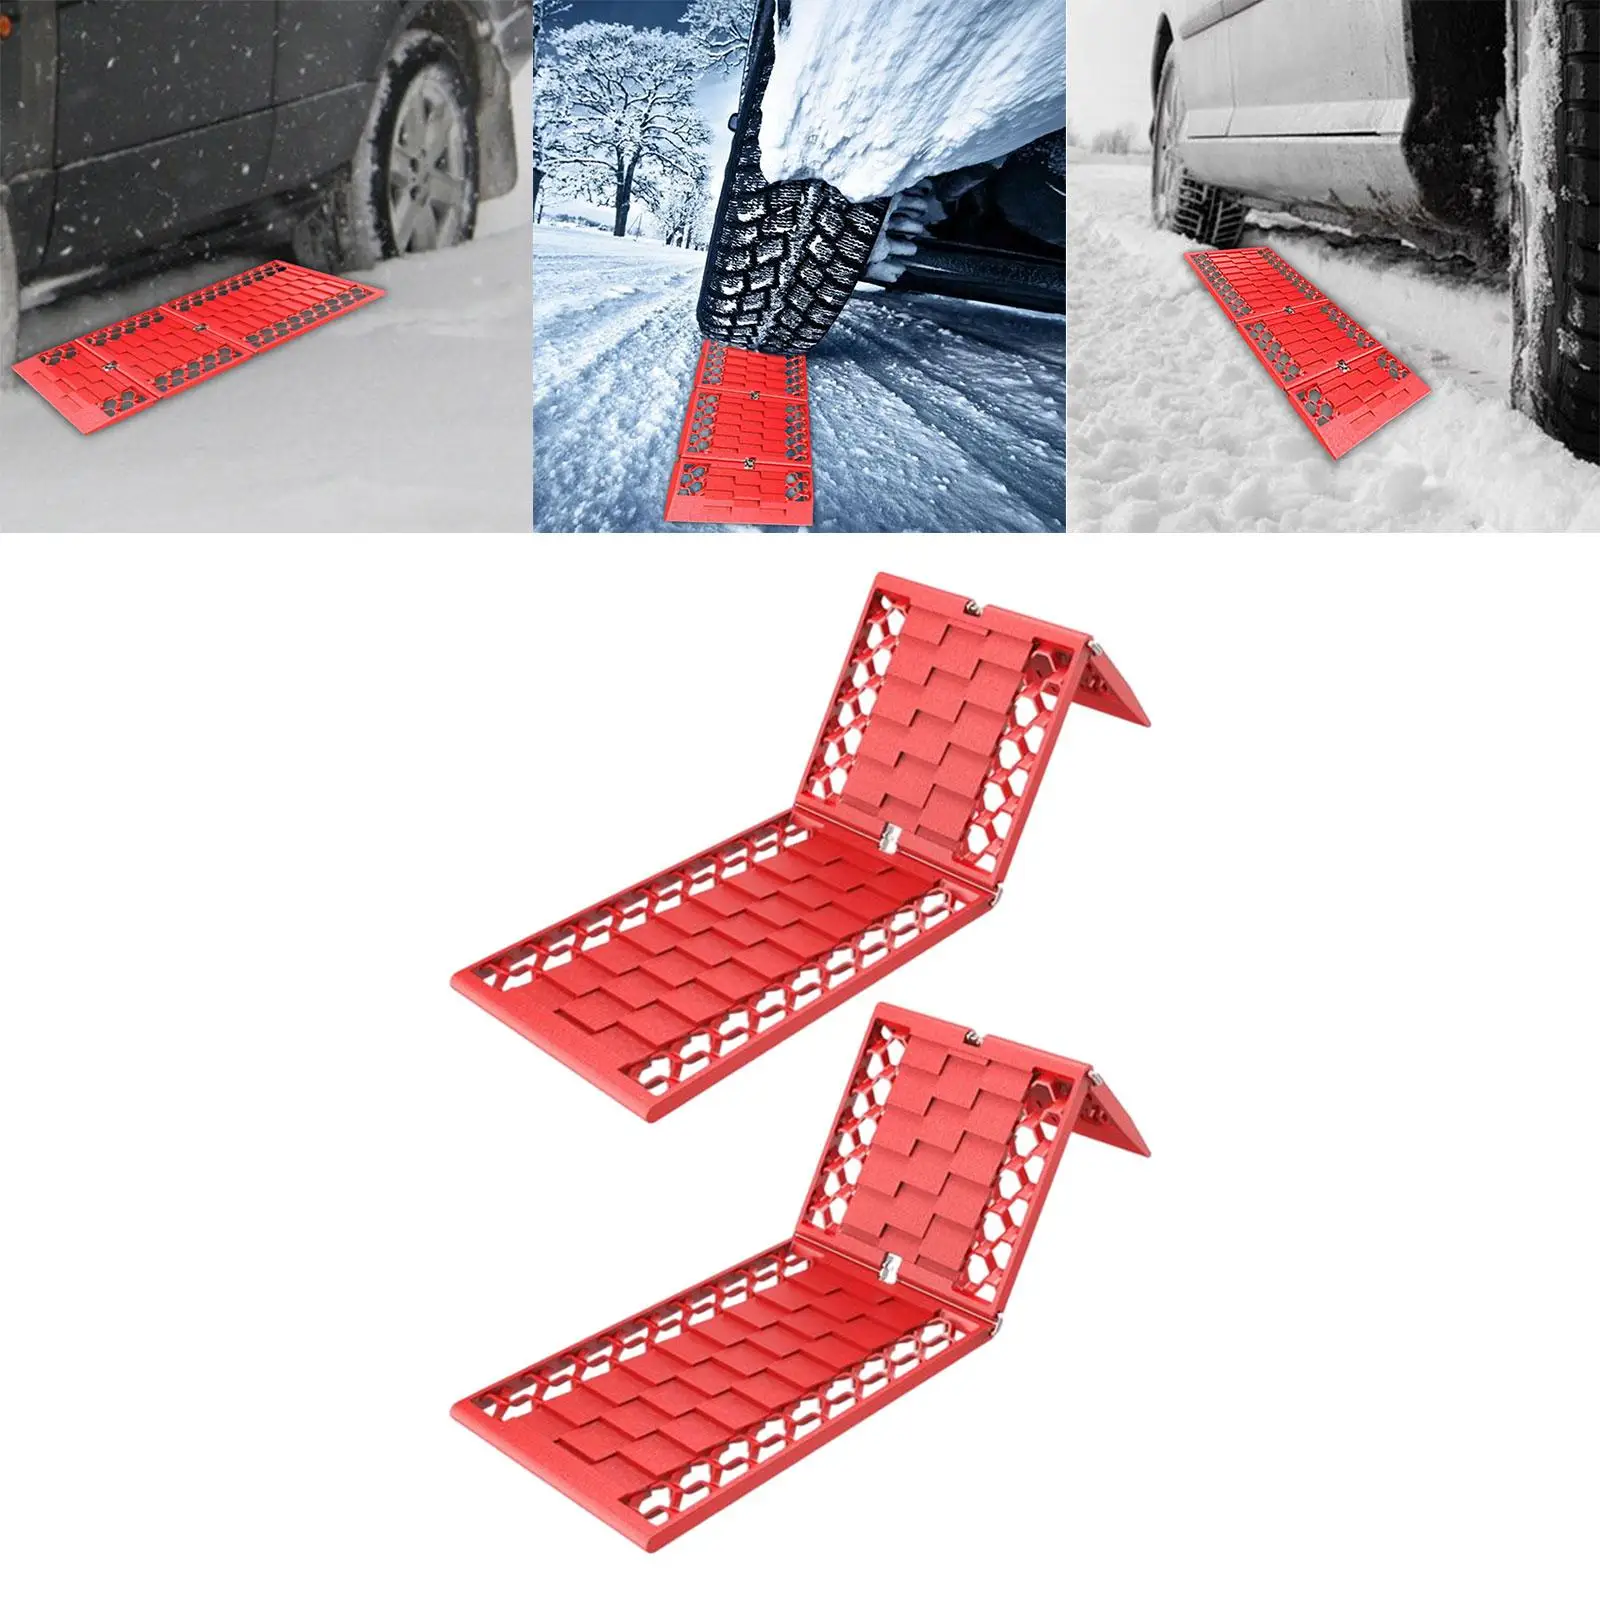 2 Pieces off roading traction track Snow Escape Devices for Vehicle Truck